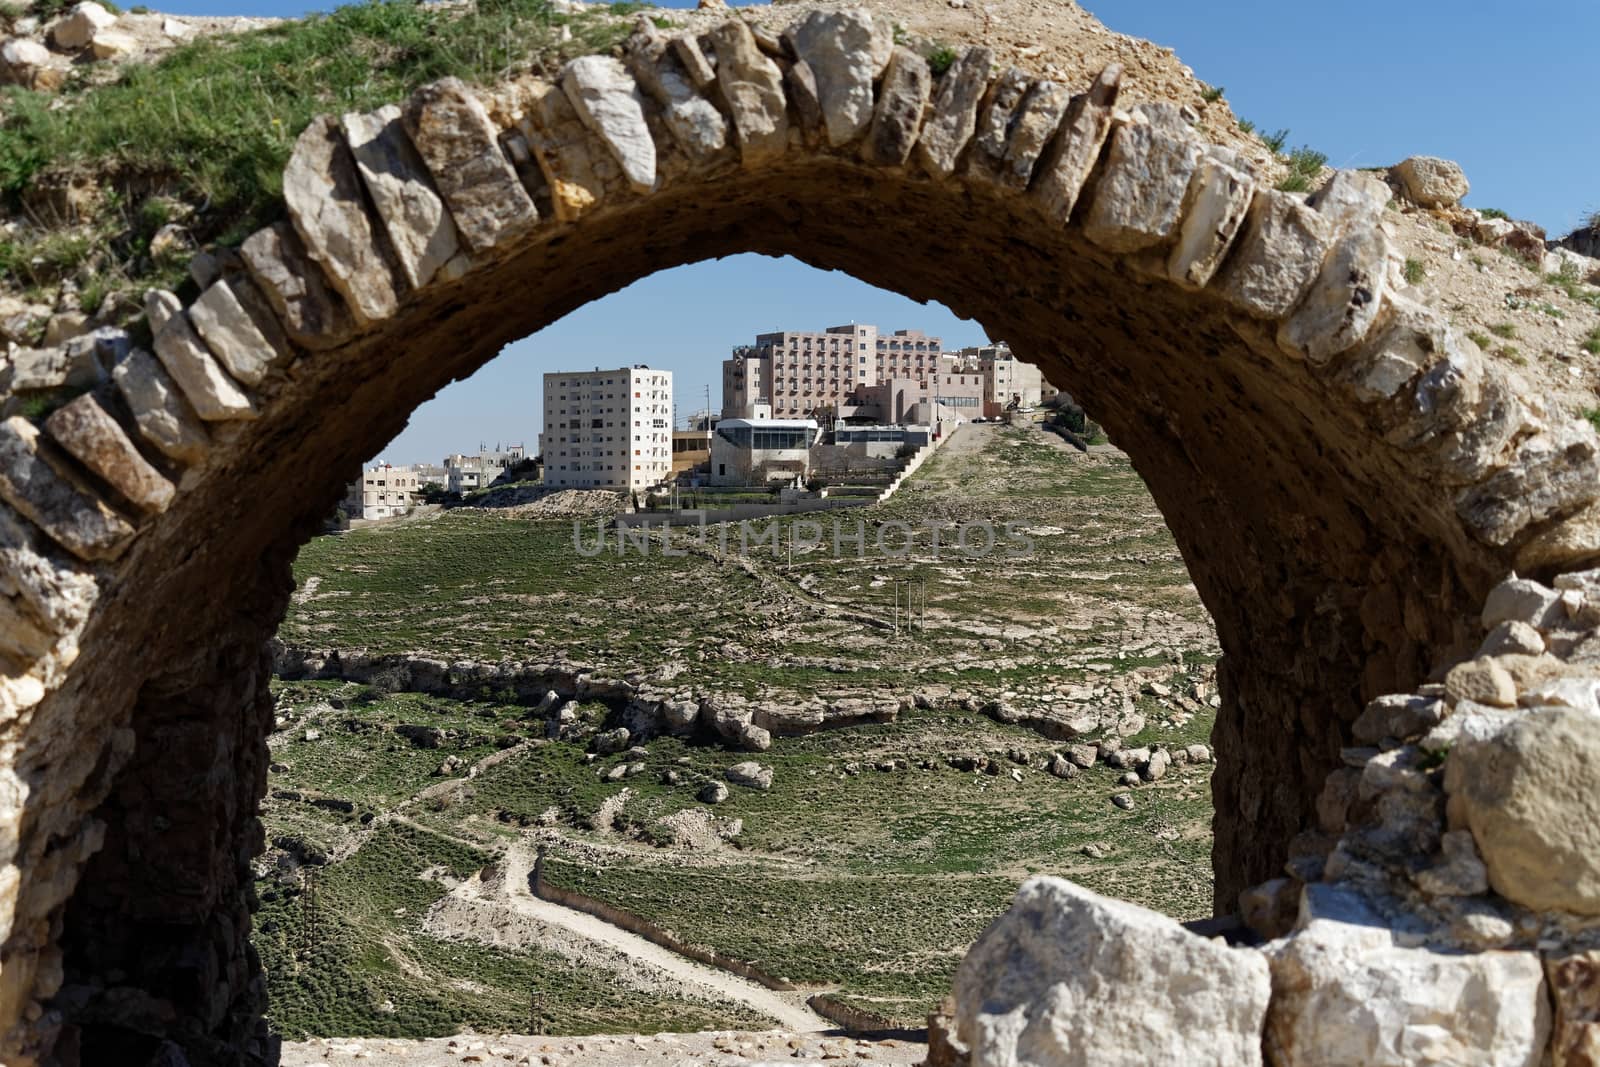 Skyscraper in the suburb of Karak in Jordan, photographed by a wall arch at the wall of the crusader castle by geogif